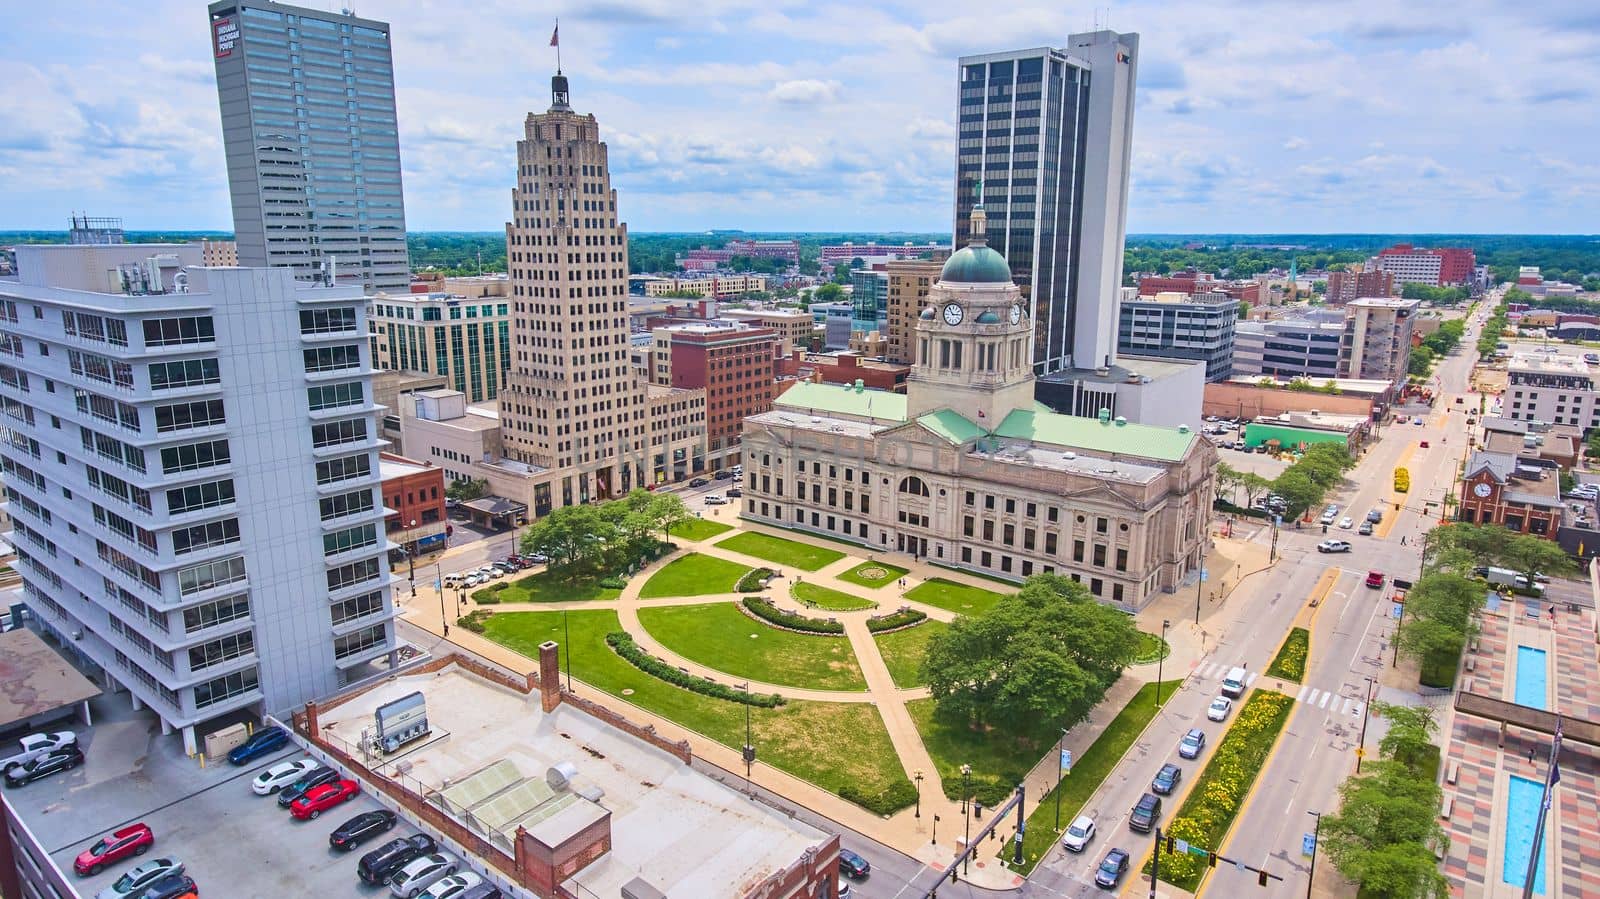 Downtown Fort Wayne aerial at Allen County Courthouse in Indiana by njproductions